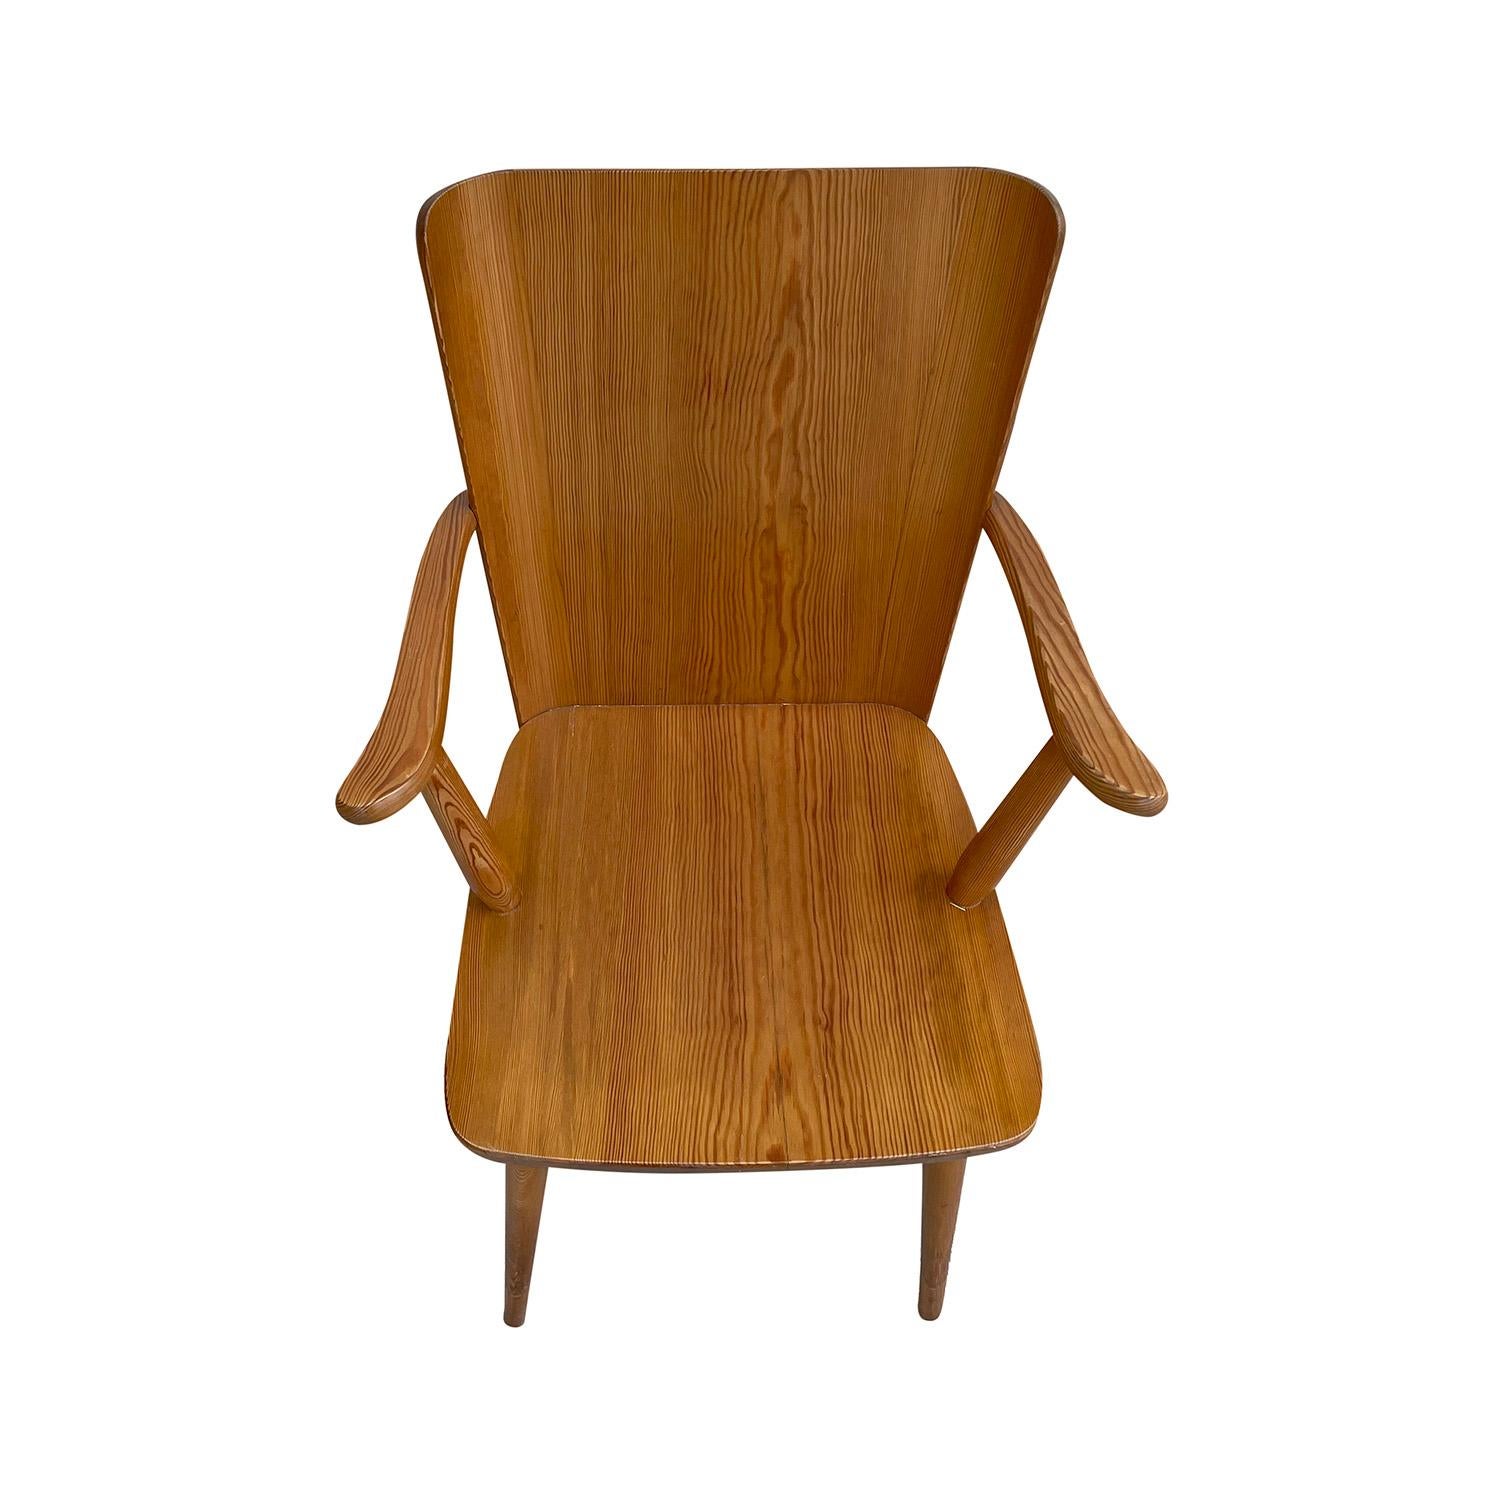 A light-brown, vintage Mid-Century Modern Swedish Fur, armchair made of hand carved and polished Pinewood, designed by Göran Malmvall and produced by Karl Andersson & Söner, in good condition. The backrest of the single Scandinavian side, end chair